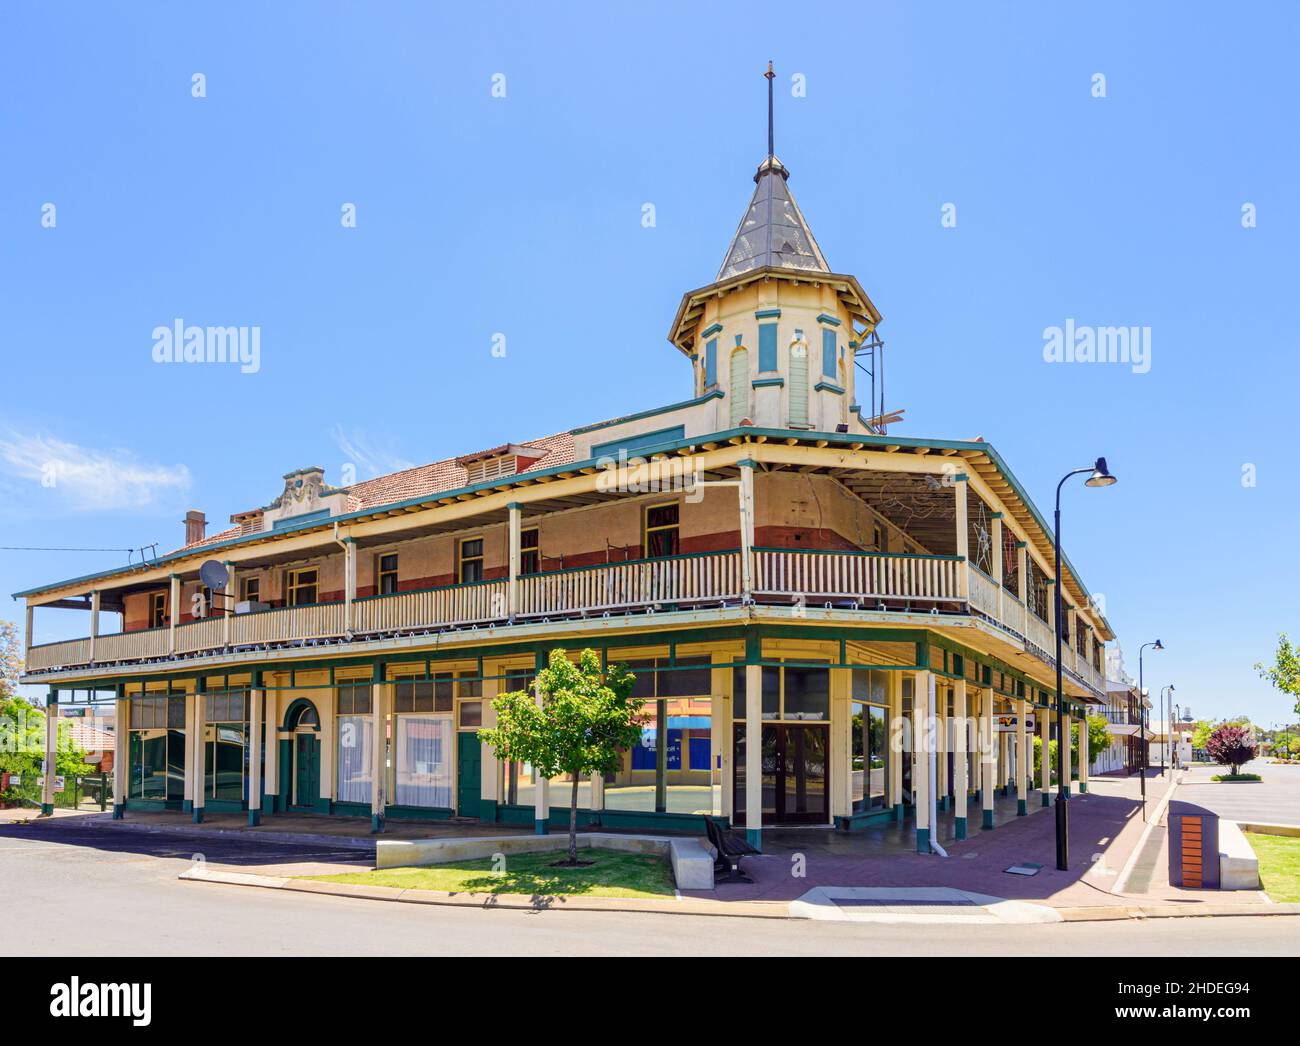 Old King George Hostel in Federation Queen Anne Revival style, part of the historic Austral Terrace in Katanning, Western Australia, Australia Stock Photo